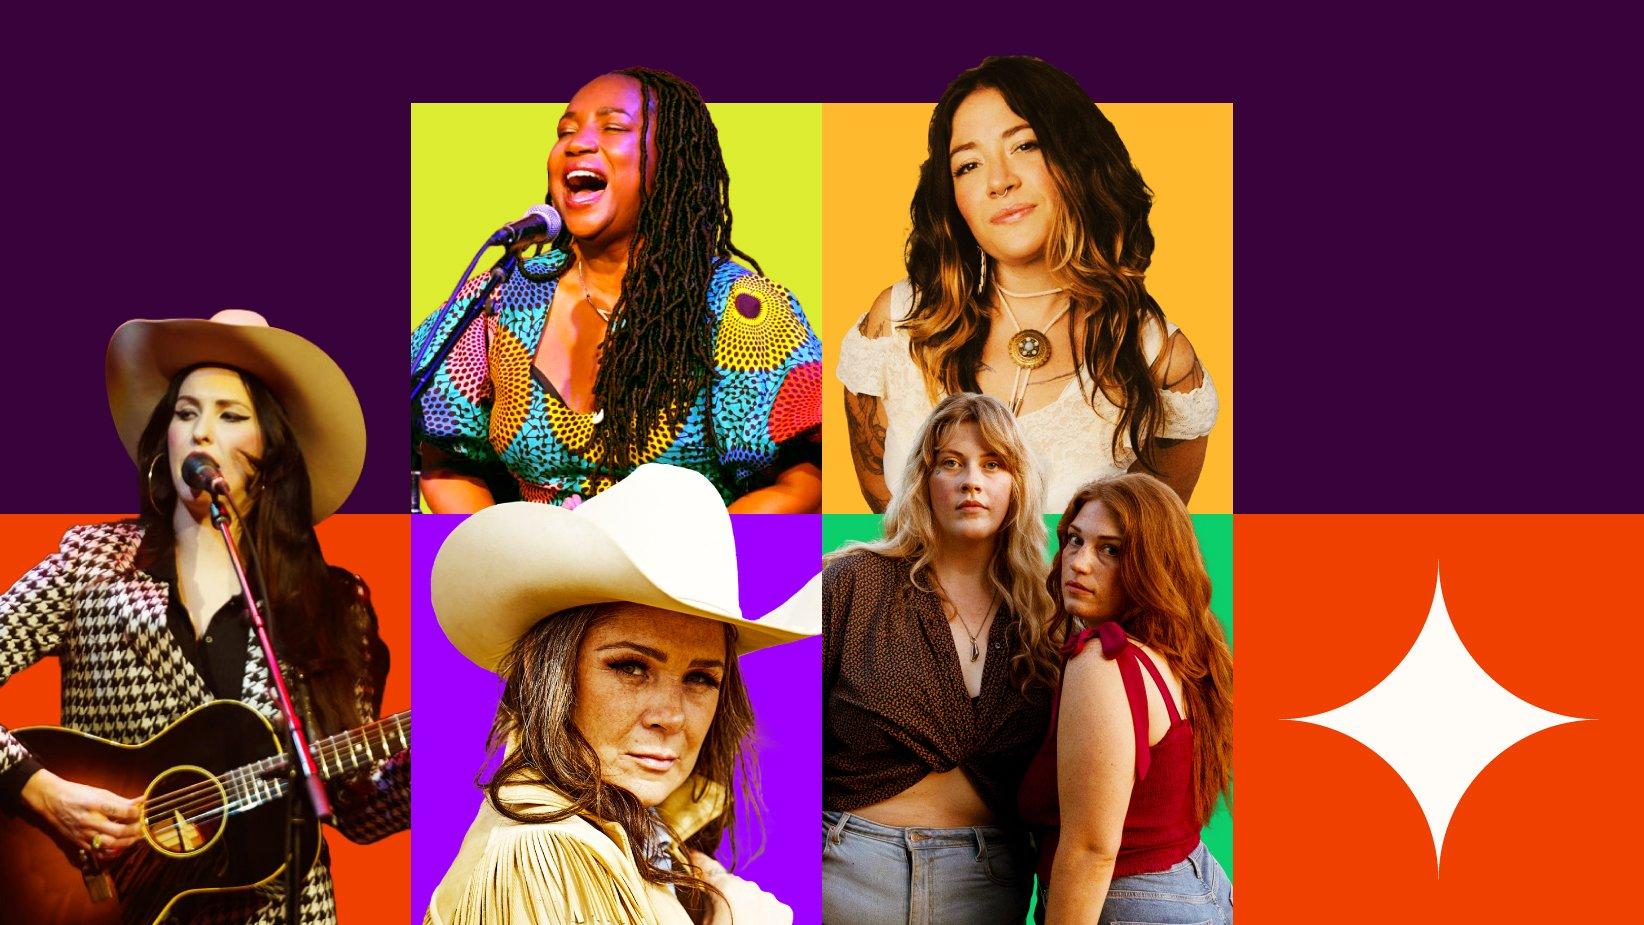 The Cowboy Hat Is Summer 2019's Breakout Star - But It's More Than